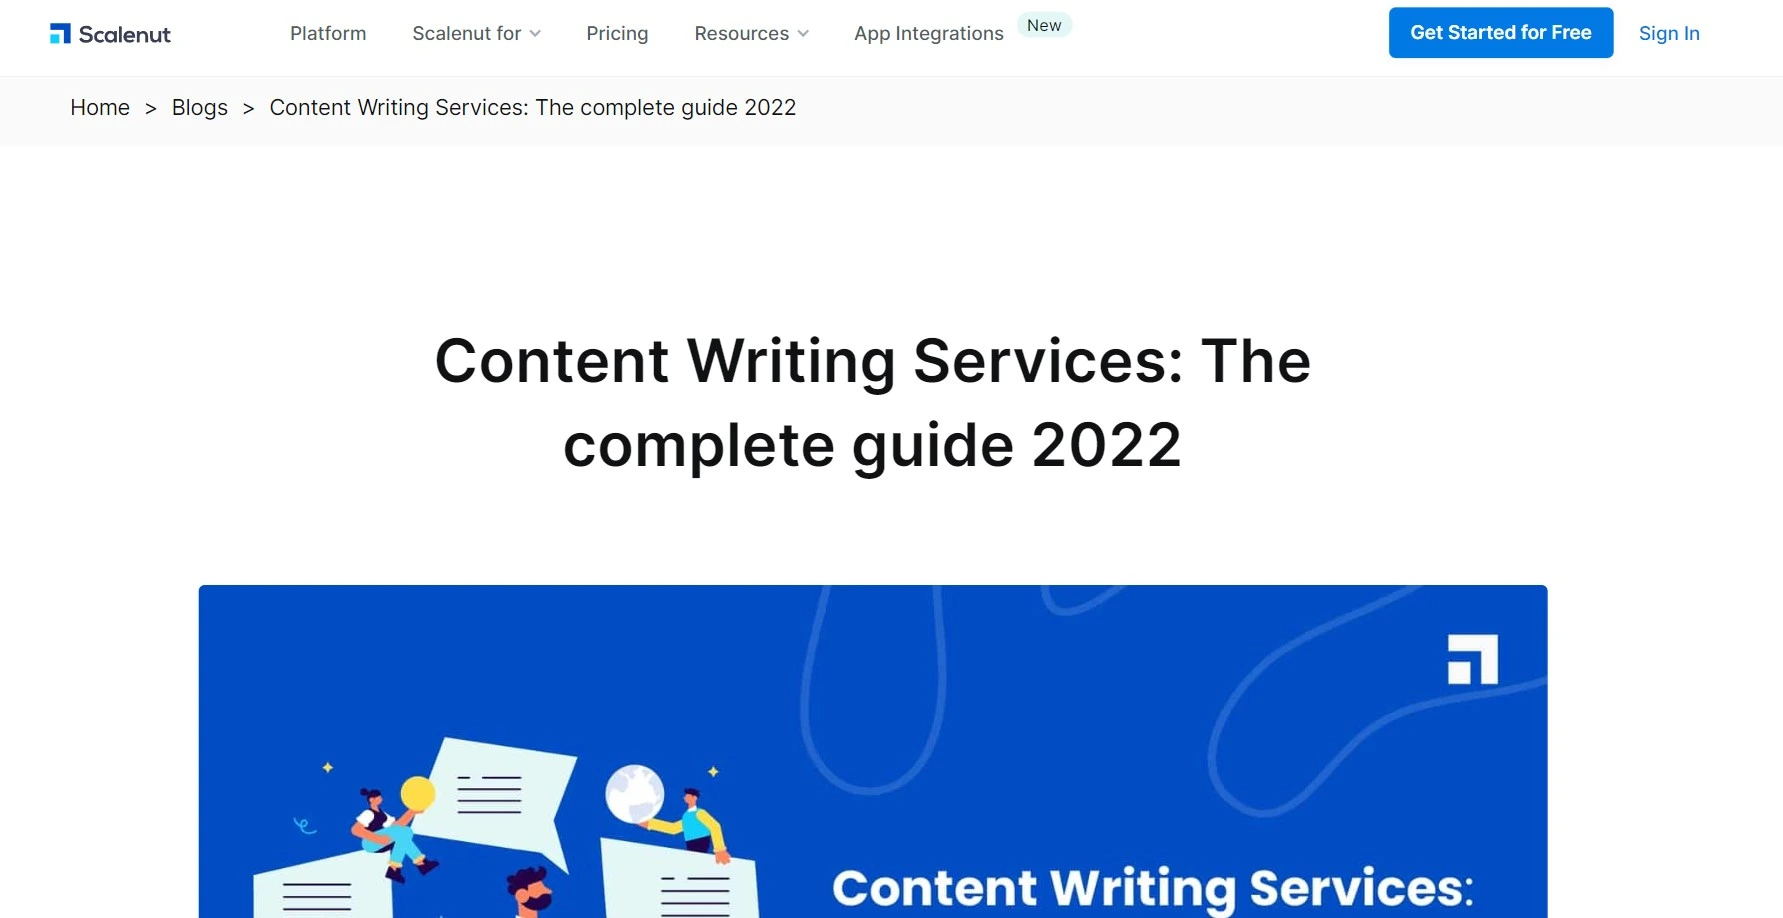 Scalenut content writing services